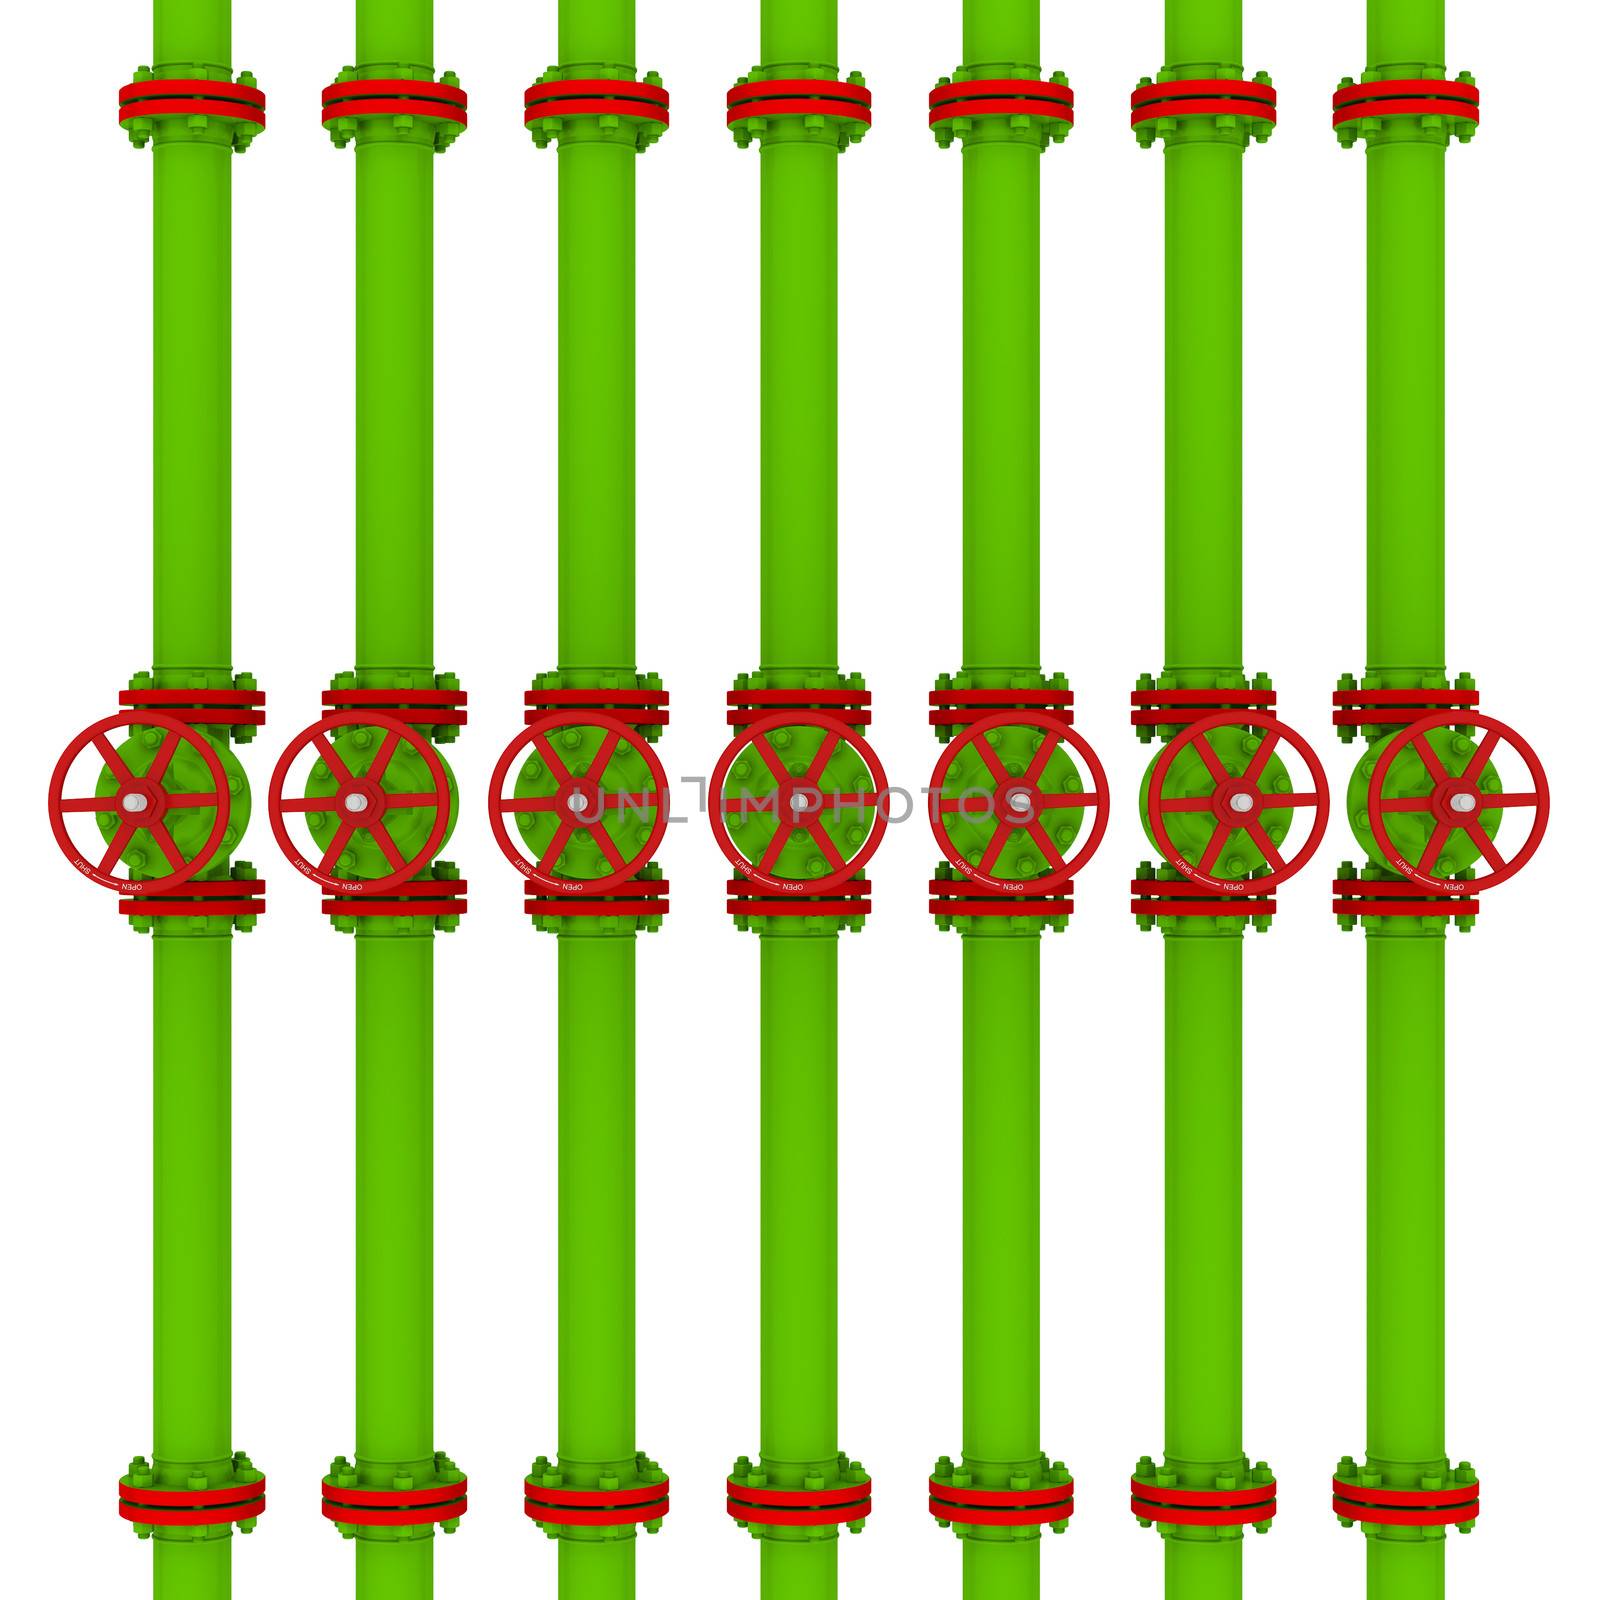 Green pipes and valves. Isolated render on a white background